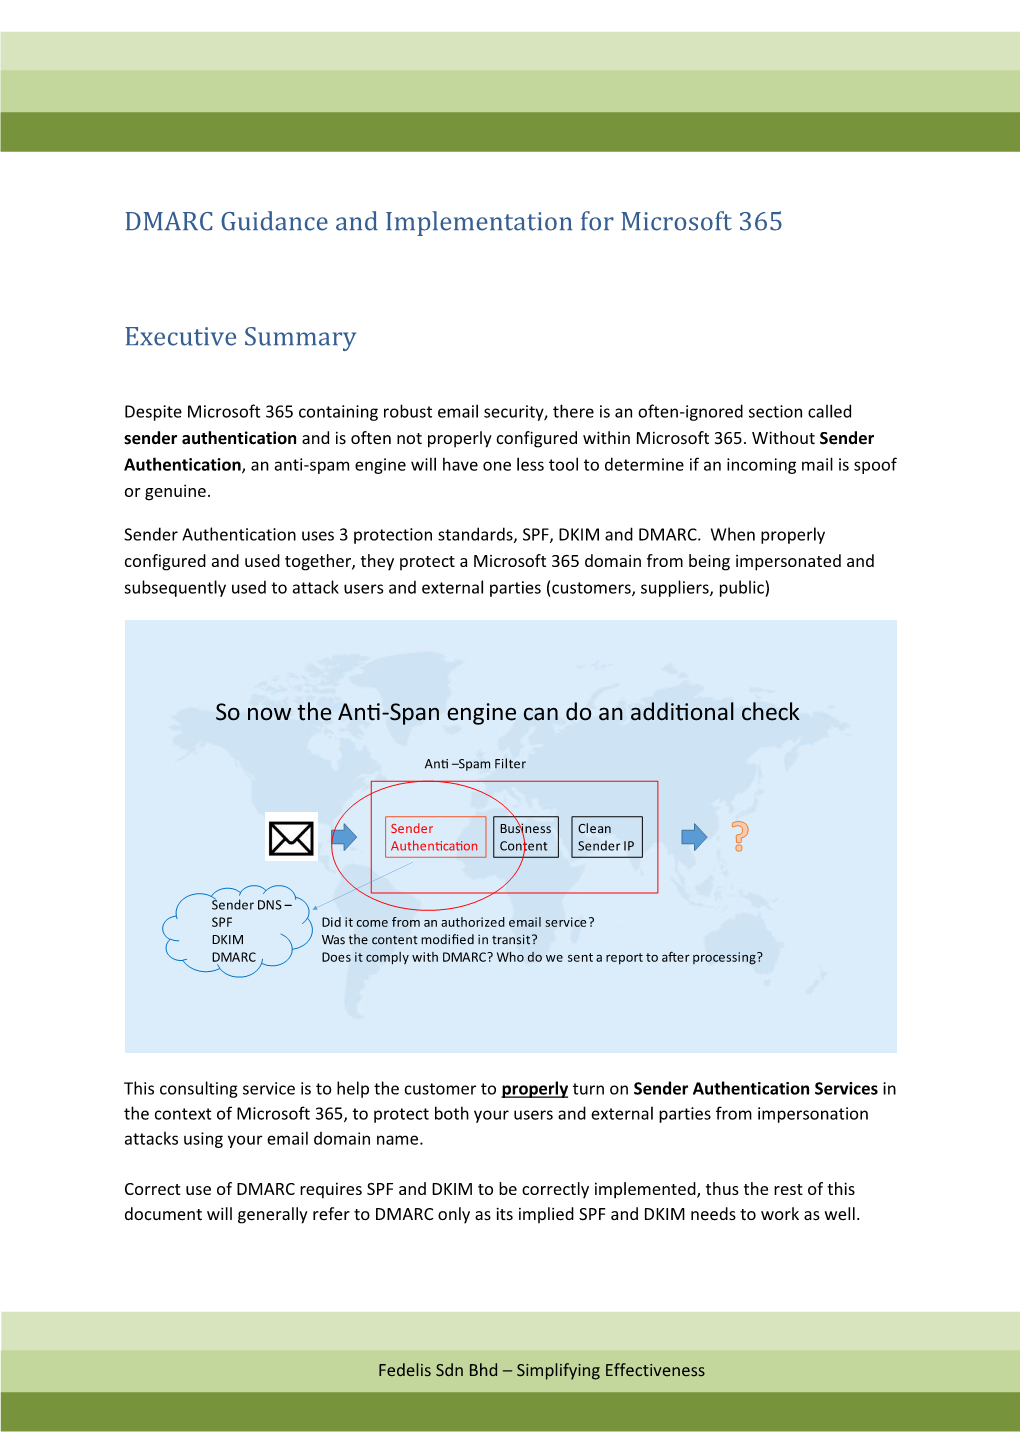 DMARC Guidance and Implementation for Microsoft 365